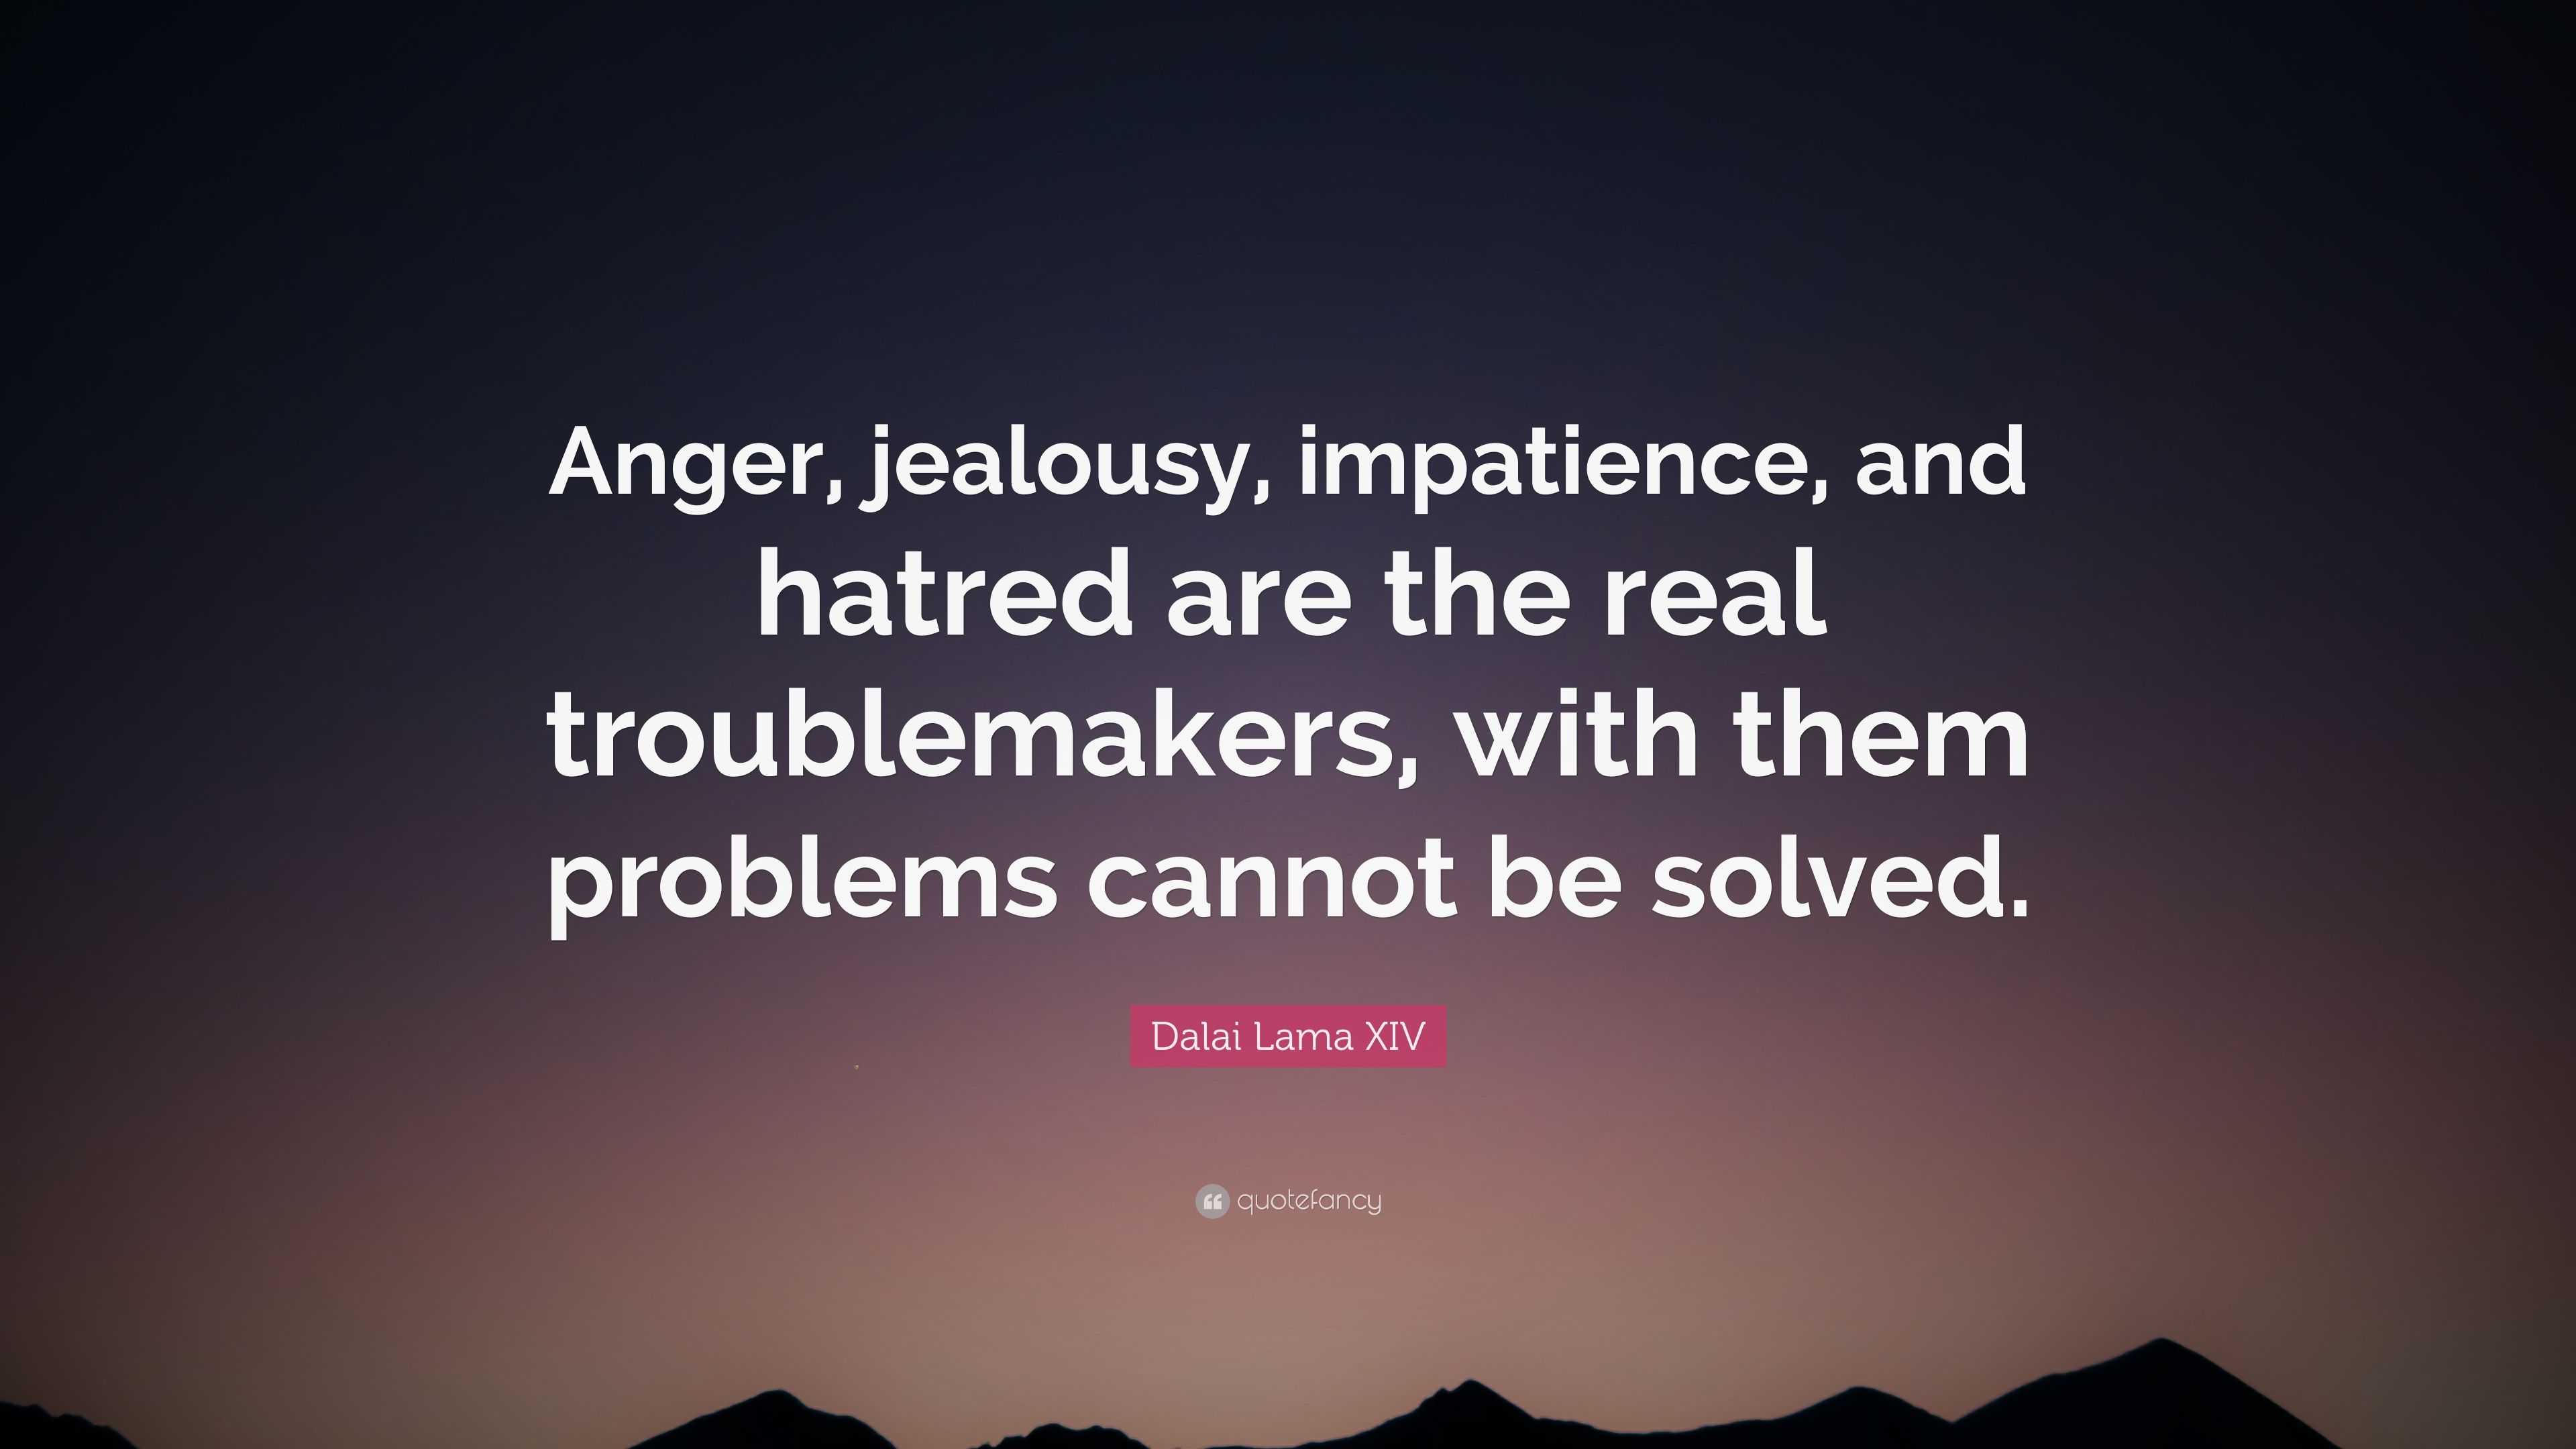 Dalai Lama XIV Quote: “Anger, jealousy, impatience, and hatred are the ...